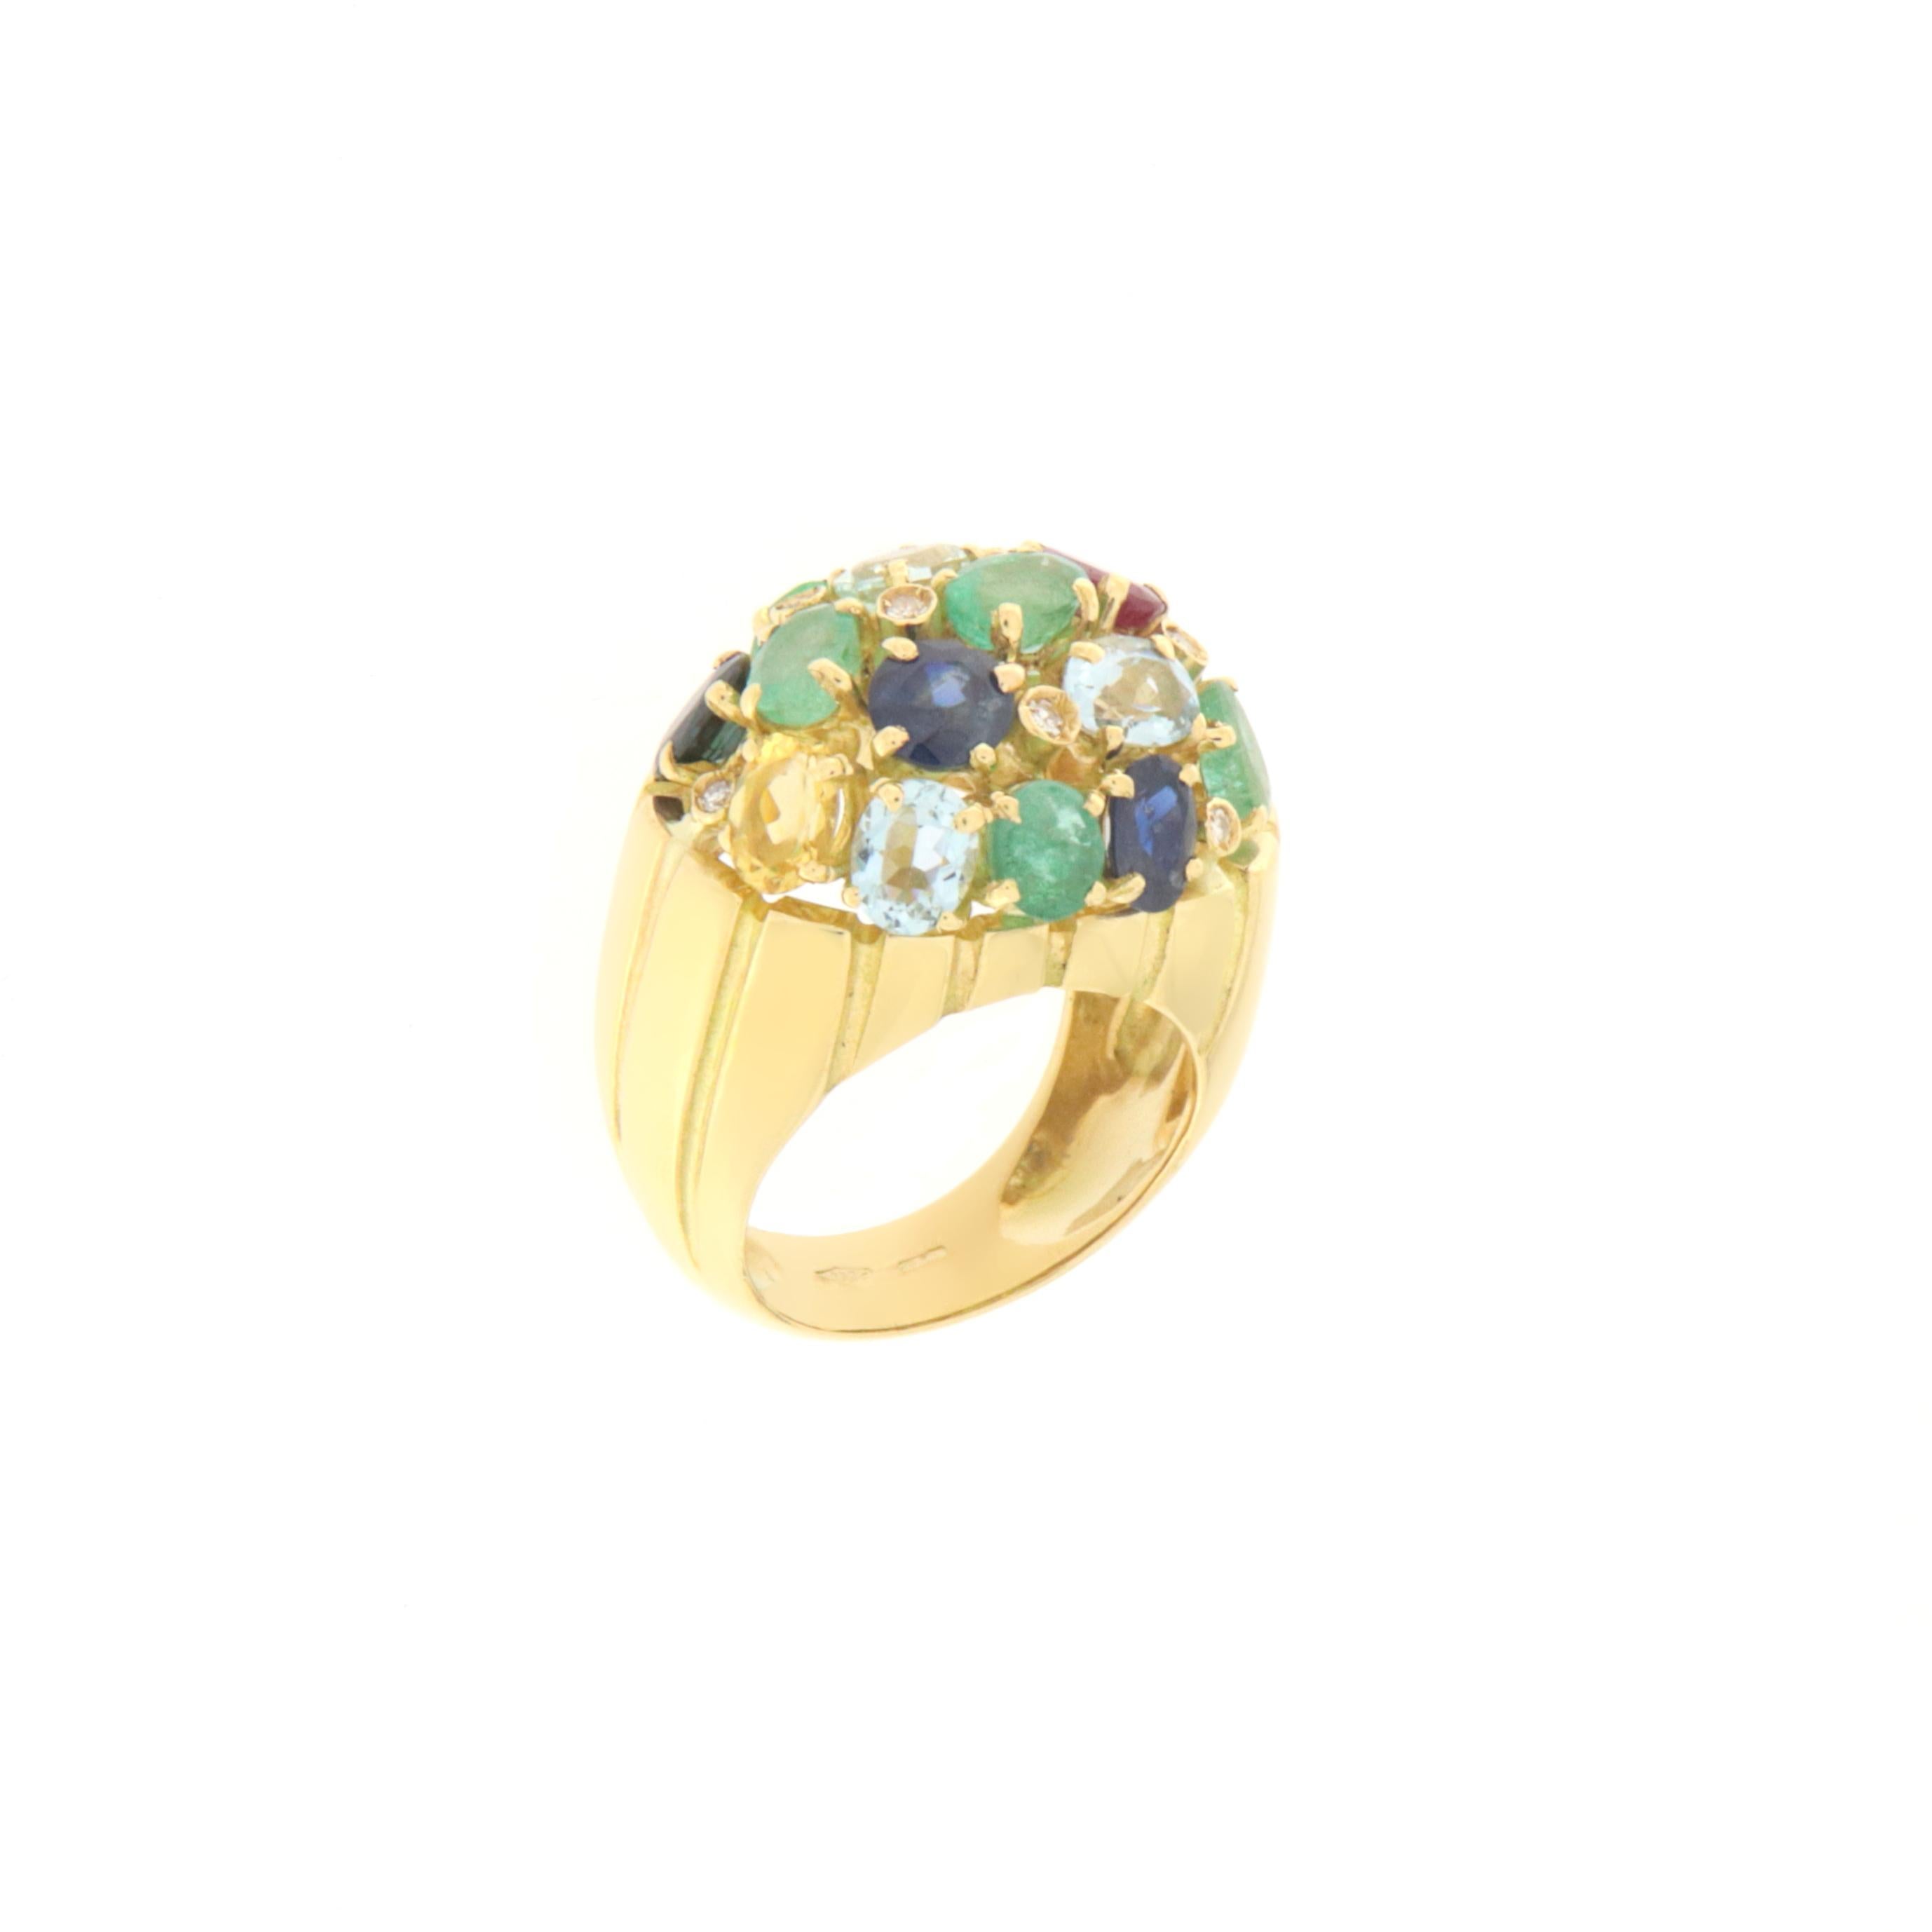 Sapphires Rubies Emeralds Aquamarine Diamonds 18 Karat Yellow Gold Cocktail Ring In New Condition For Sale In Marcianise, IT